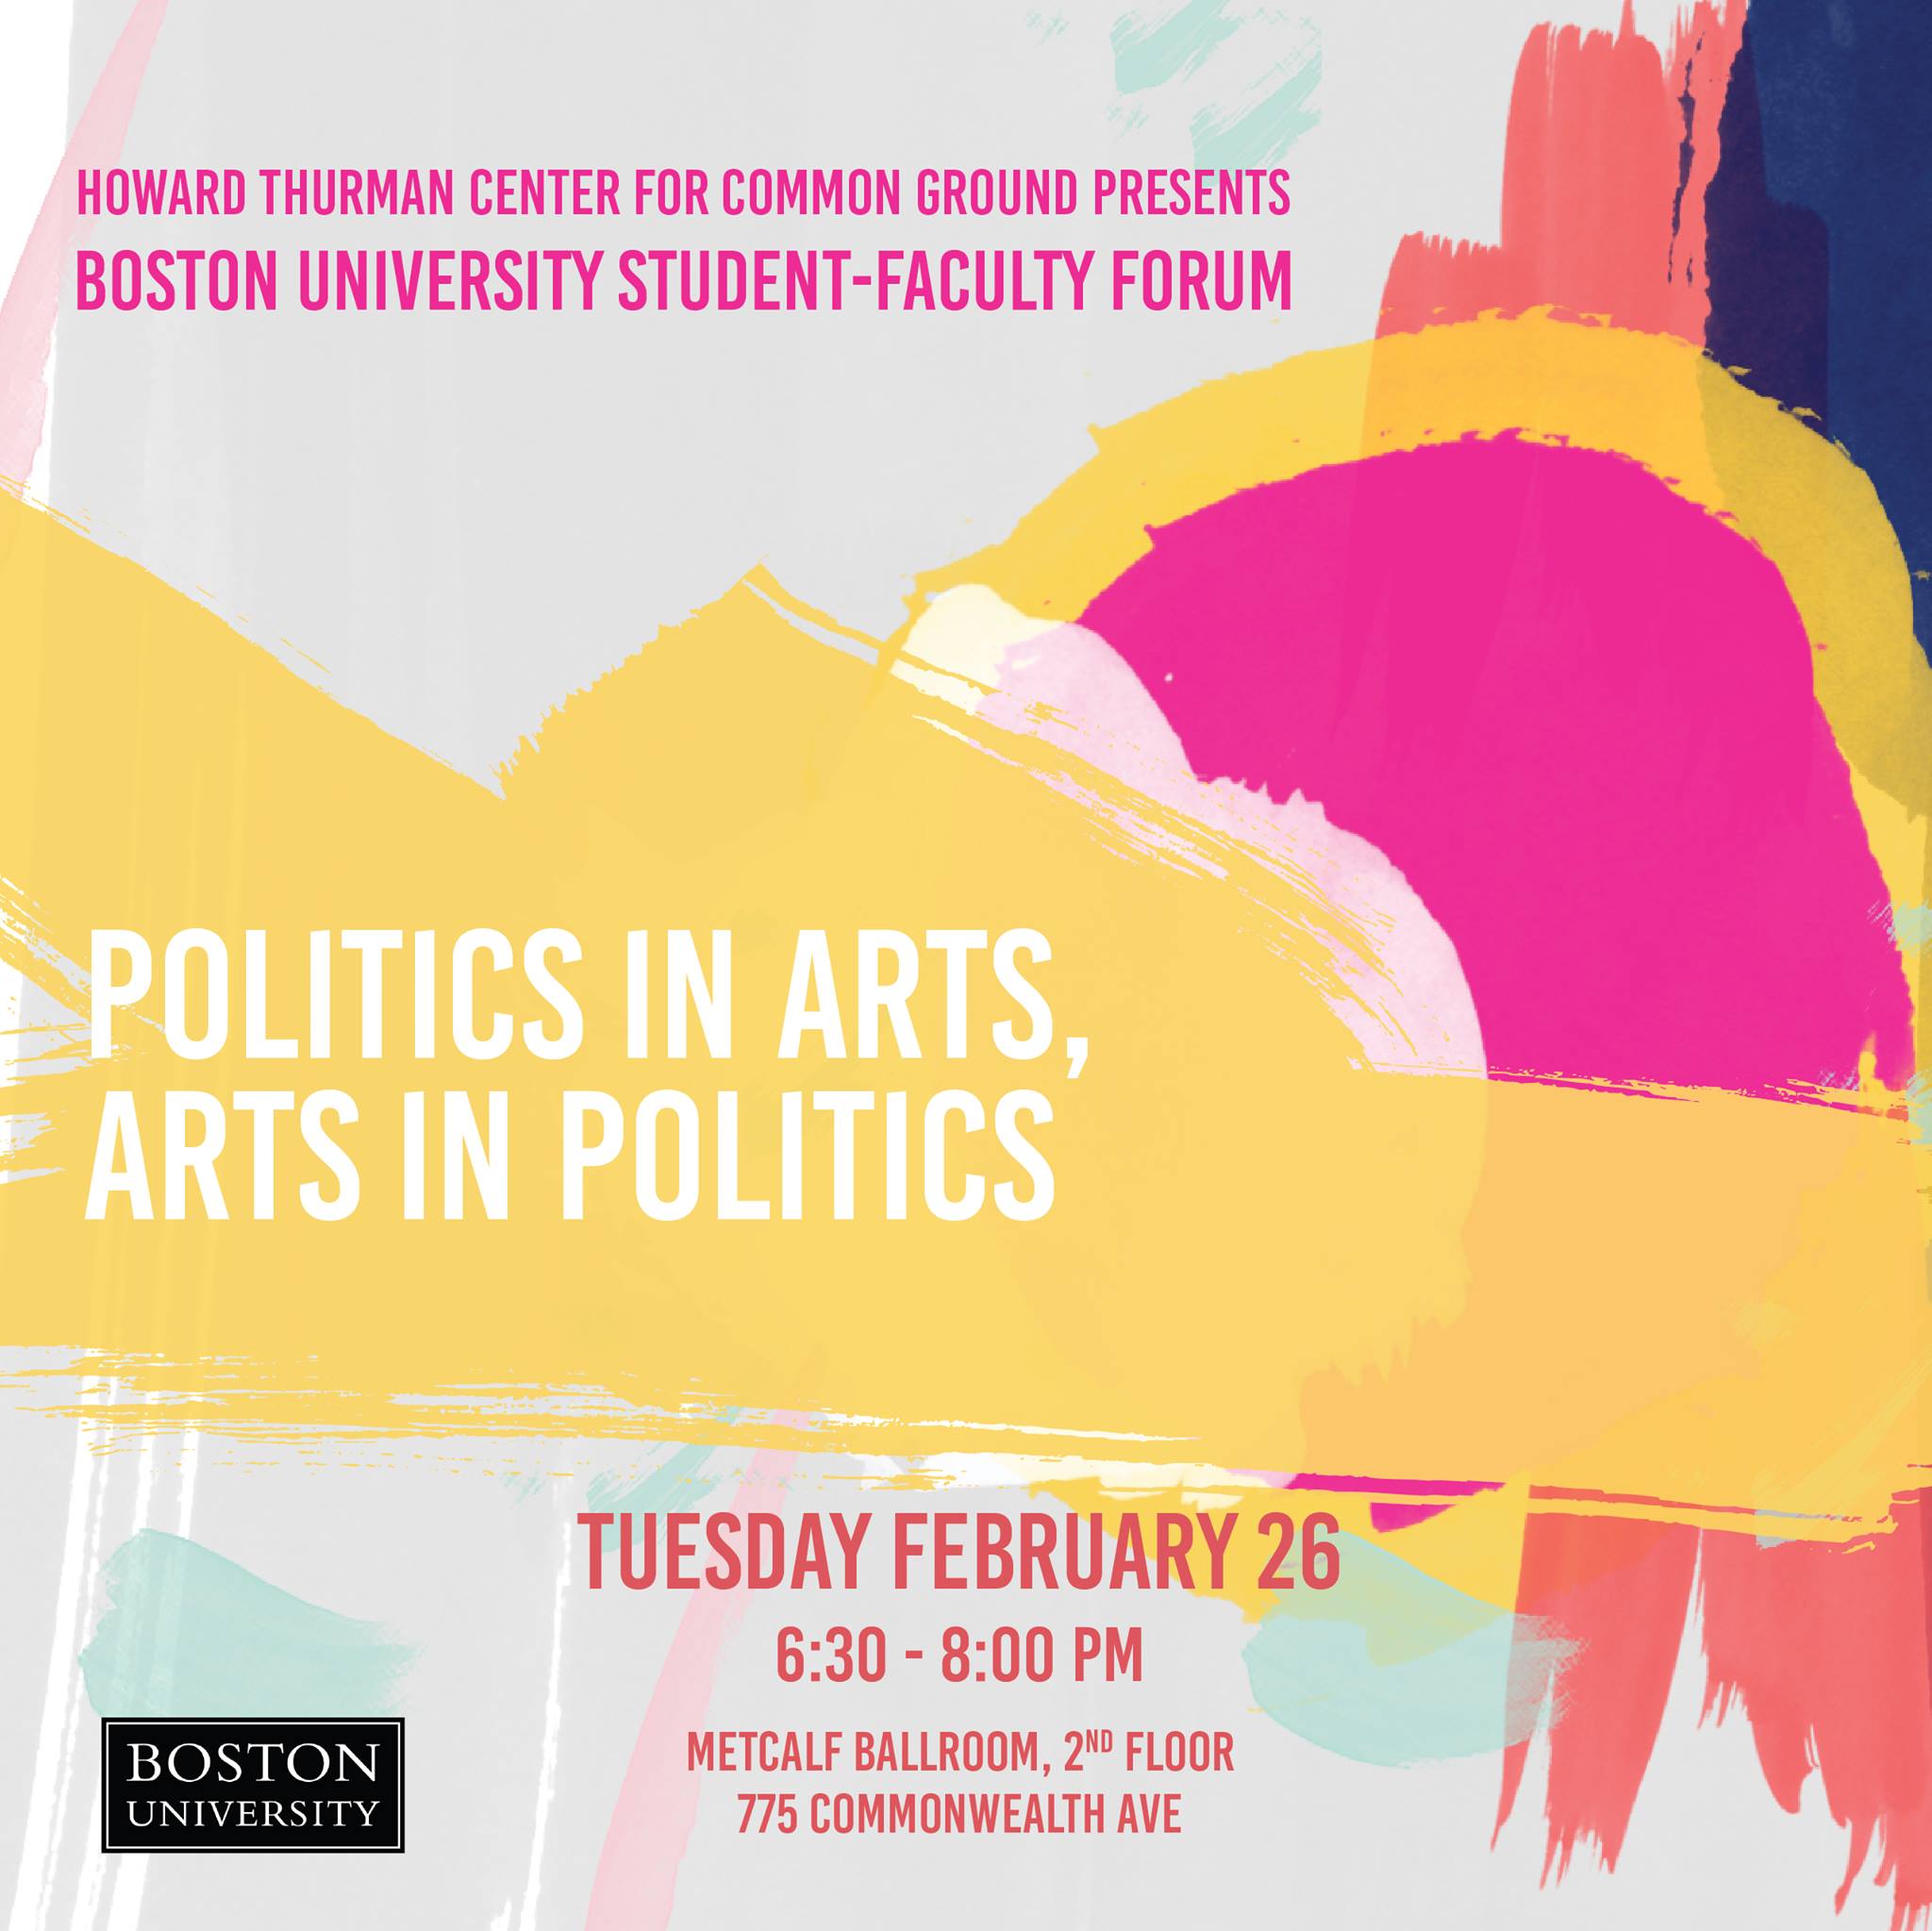 An image advertising Politics in Arts, Arts in Politics a Student Faculty Forum event on February 26, 2019